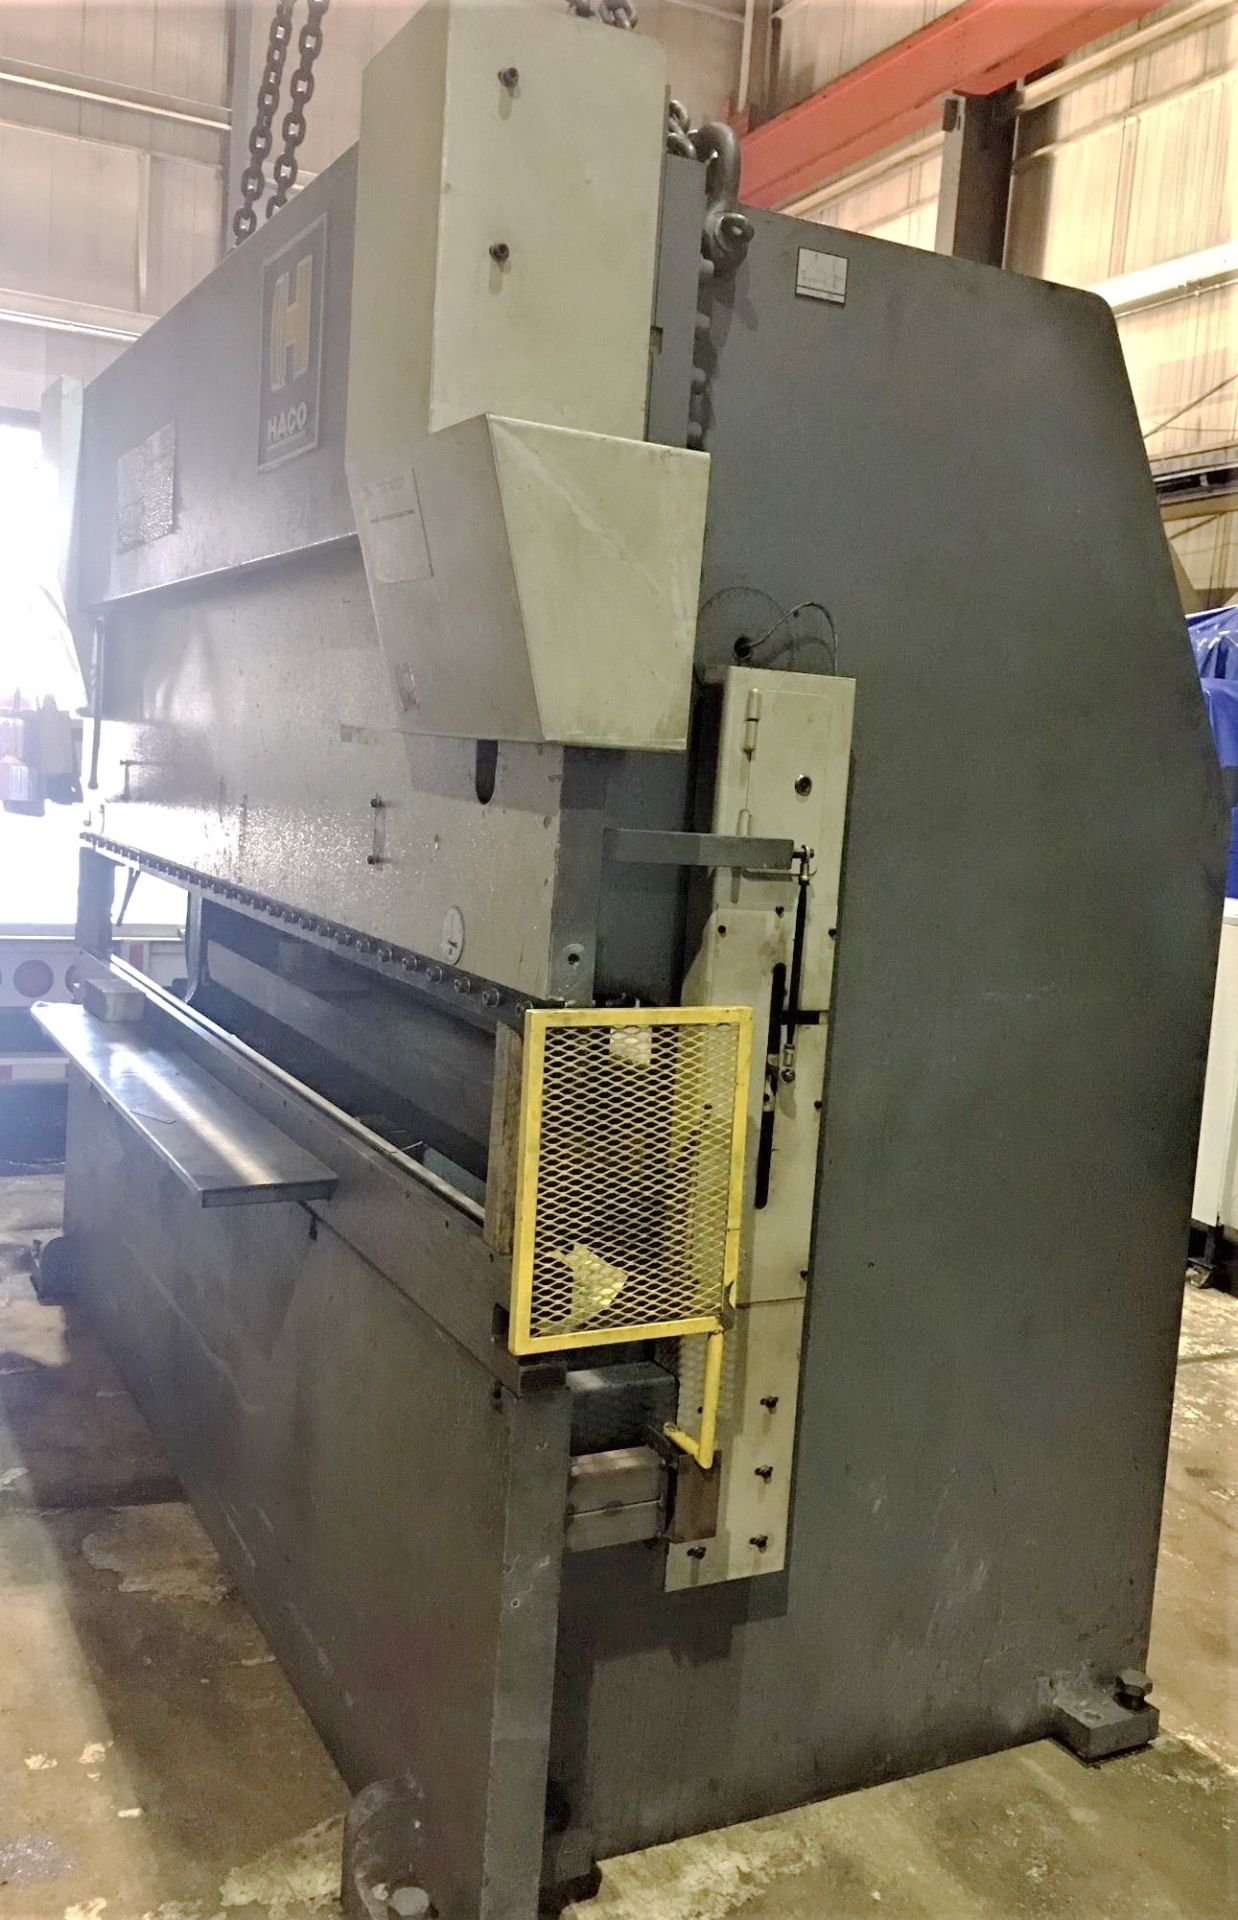 Haco Atlantic CNC Hydraulic Press Brake 120 Ton x 10', Located In Painesville, OH - 8615P - Image 5 of 14